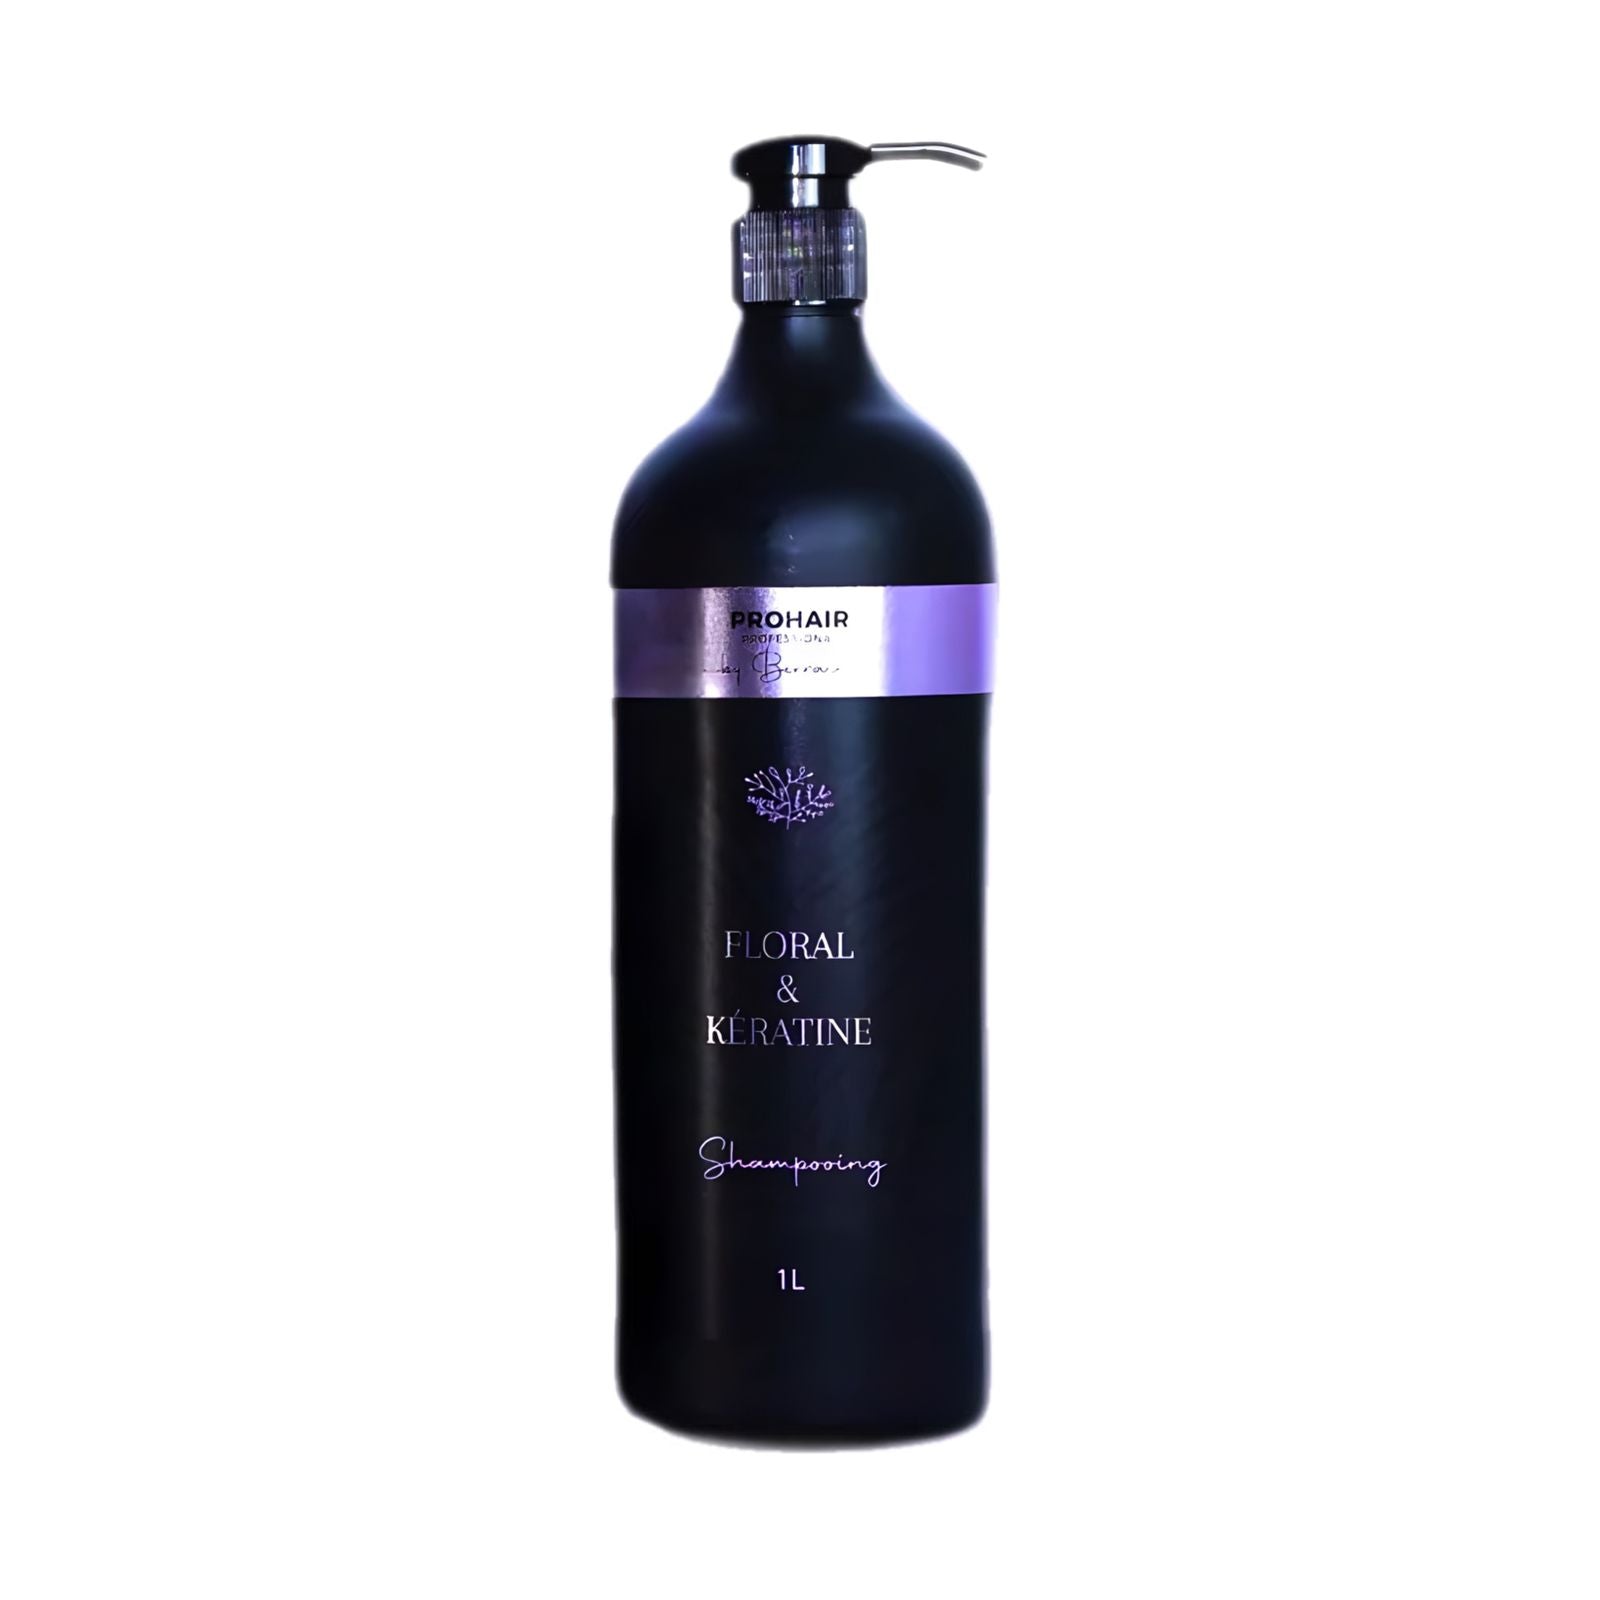 FLORAL KERATINE SHAMPOOING - PROHAIR 1L